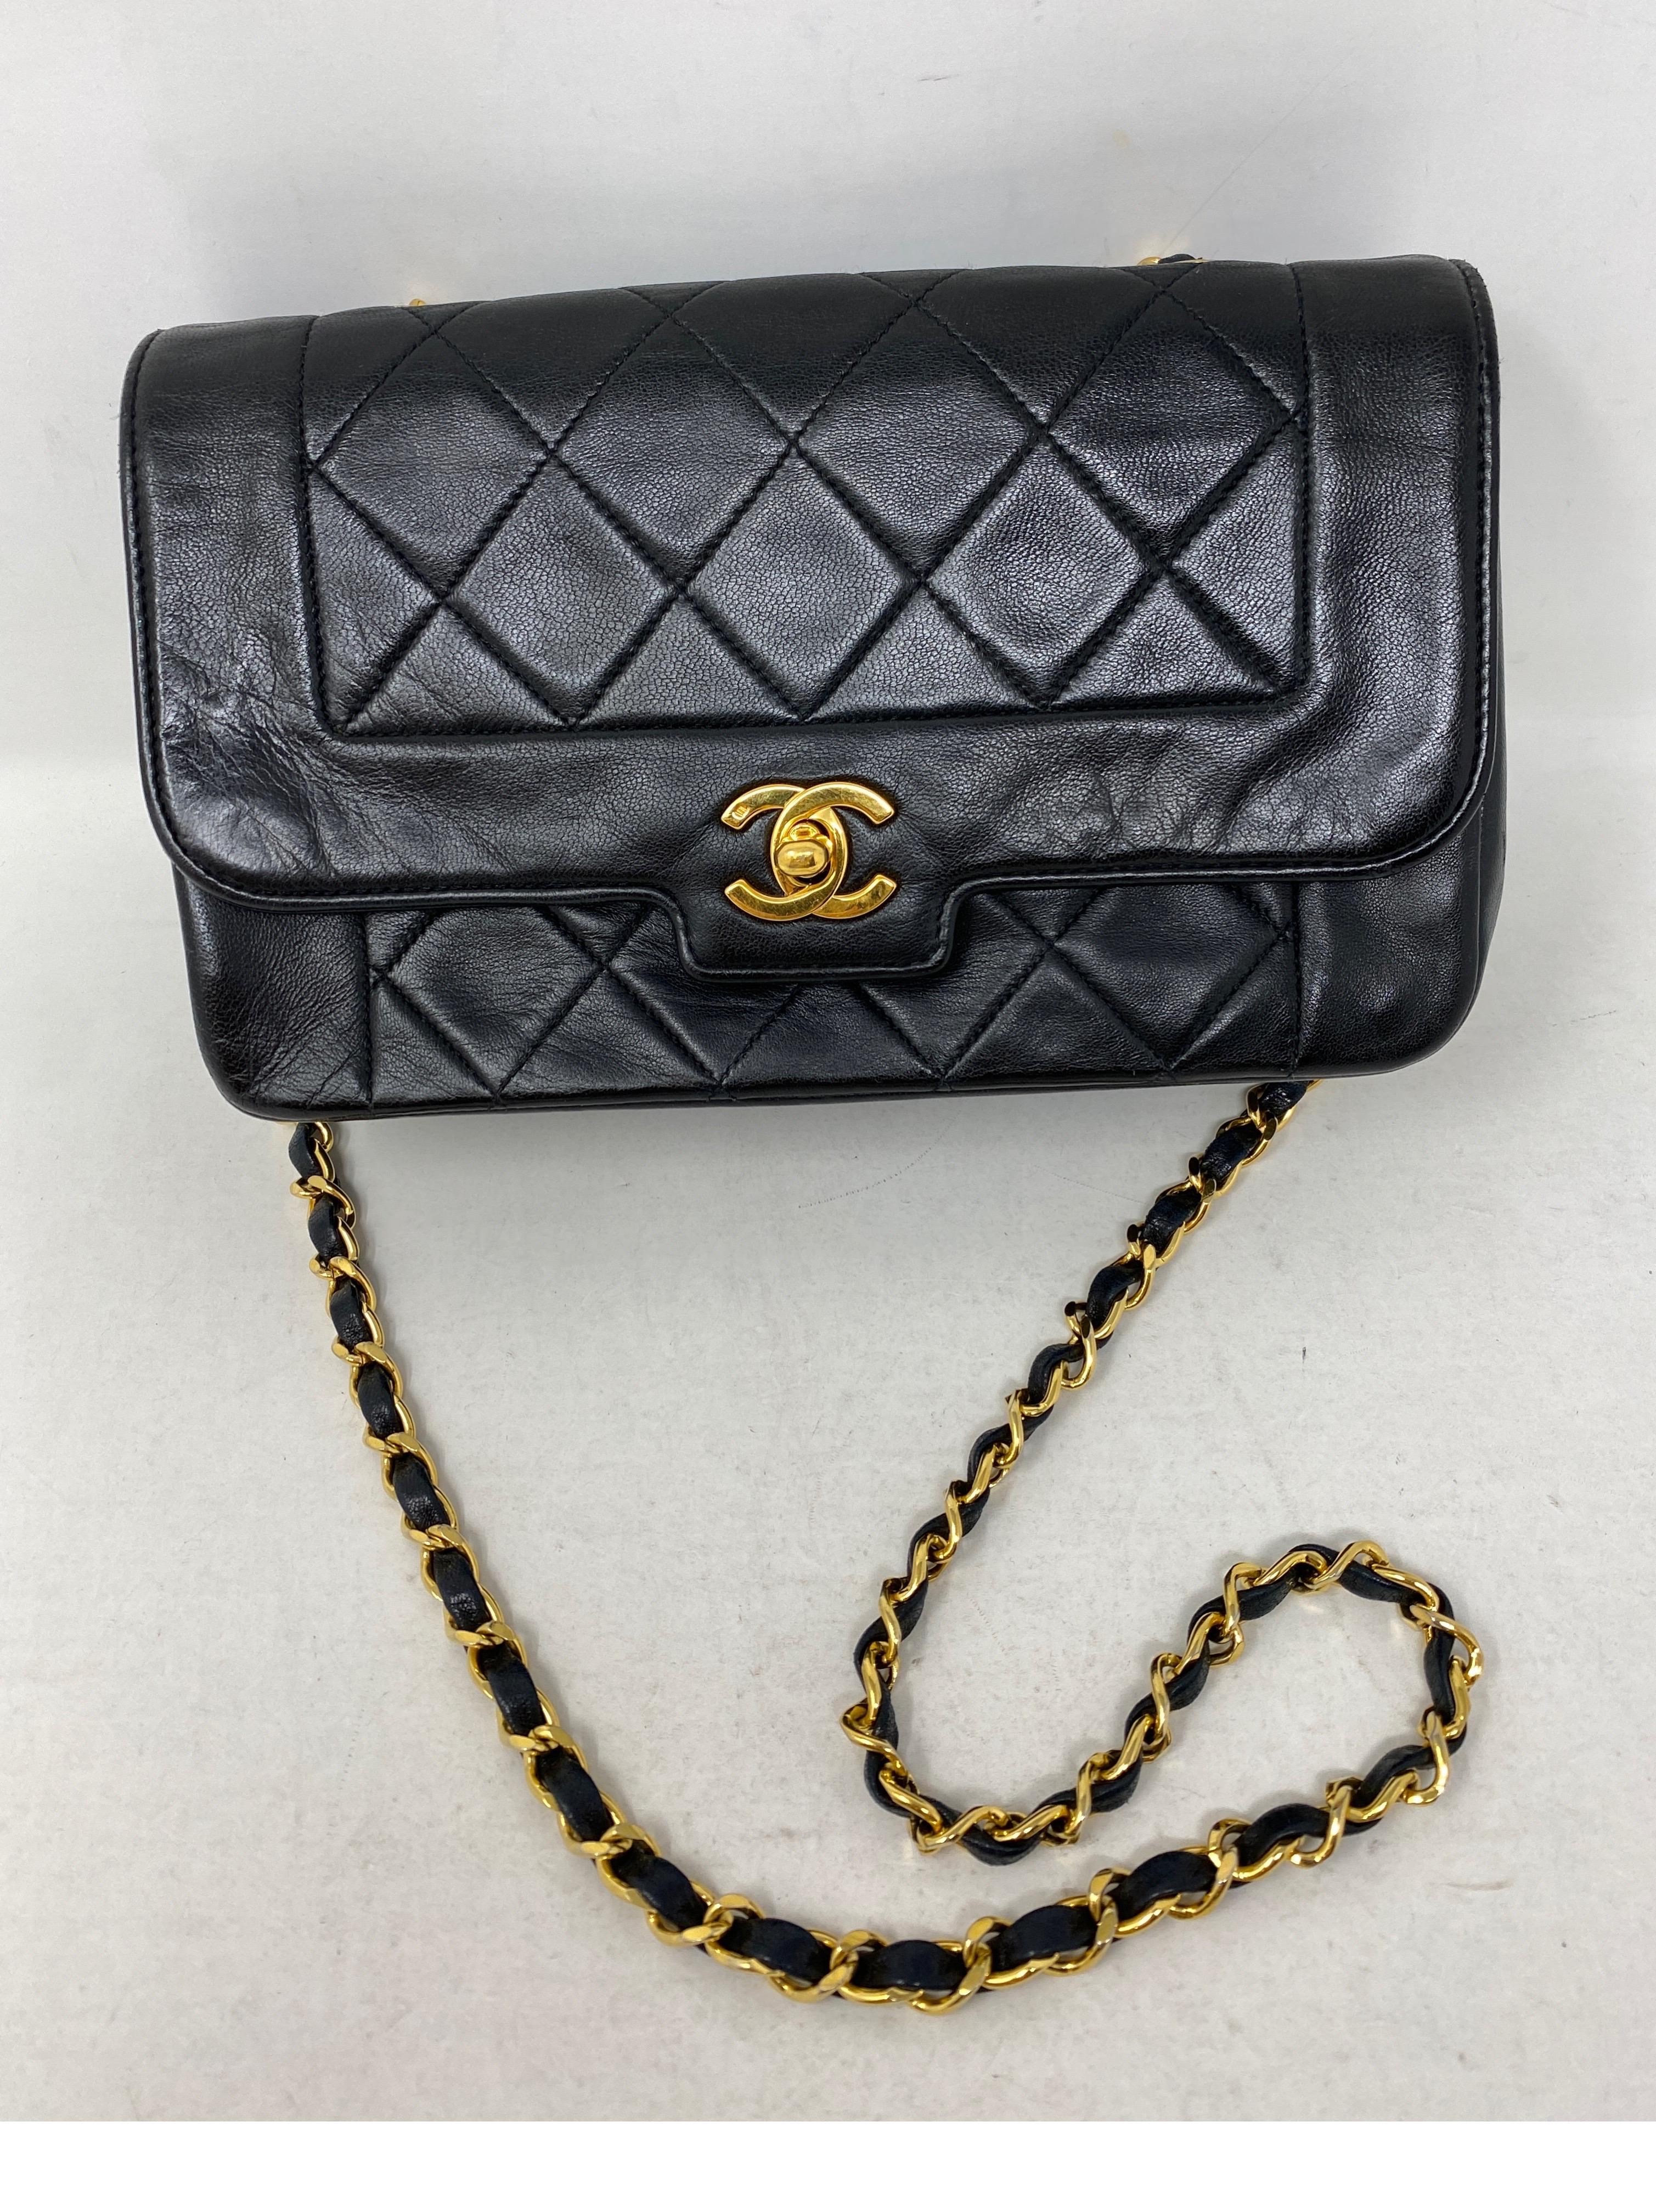 Chanel Black Diana Vintage Bag. Vintage lambskin leather. 24 kt gold plating on hardware and chain. Classic bag by Chanel. Invest in the classics. Includes authenticity card. Guaranteed authentic. 